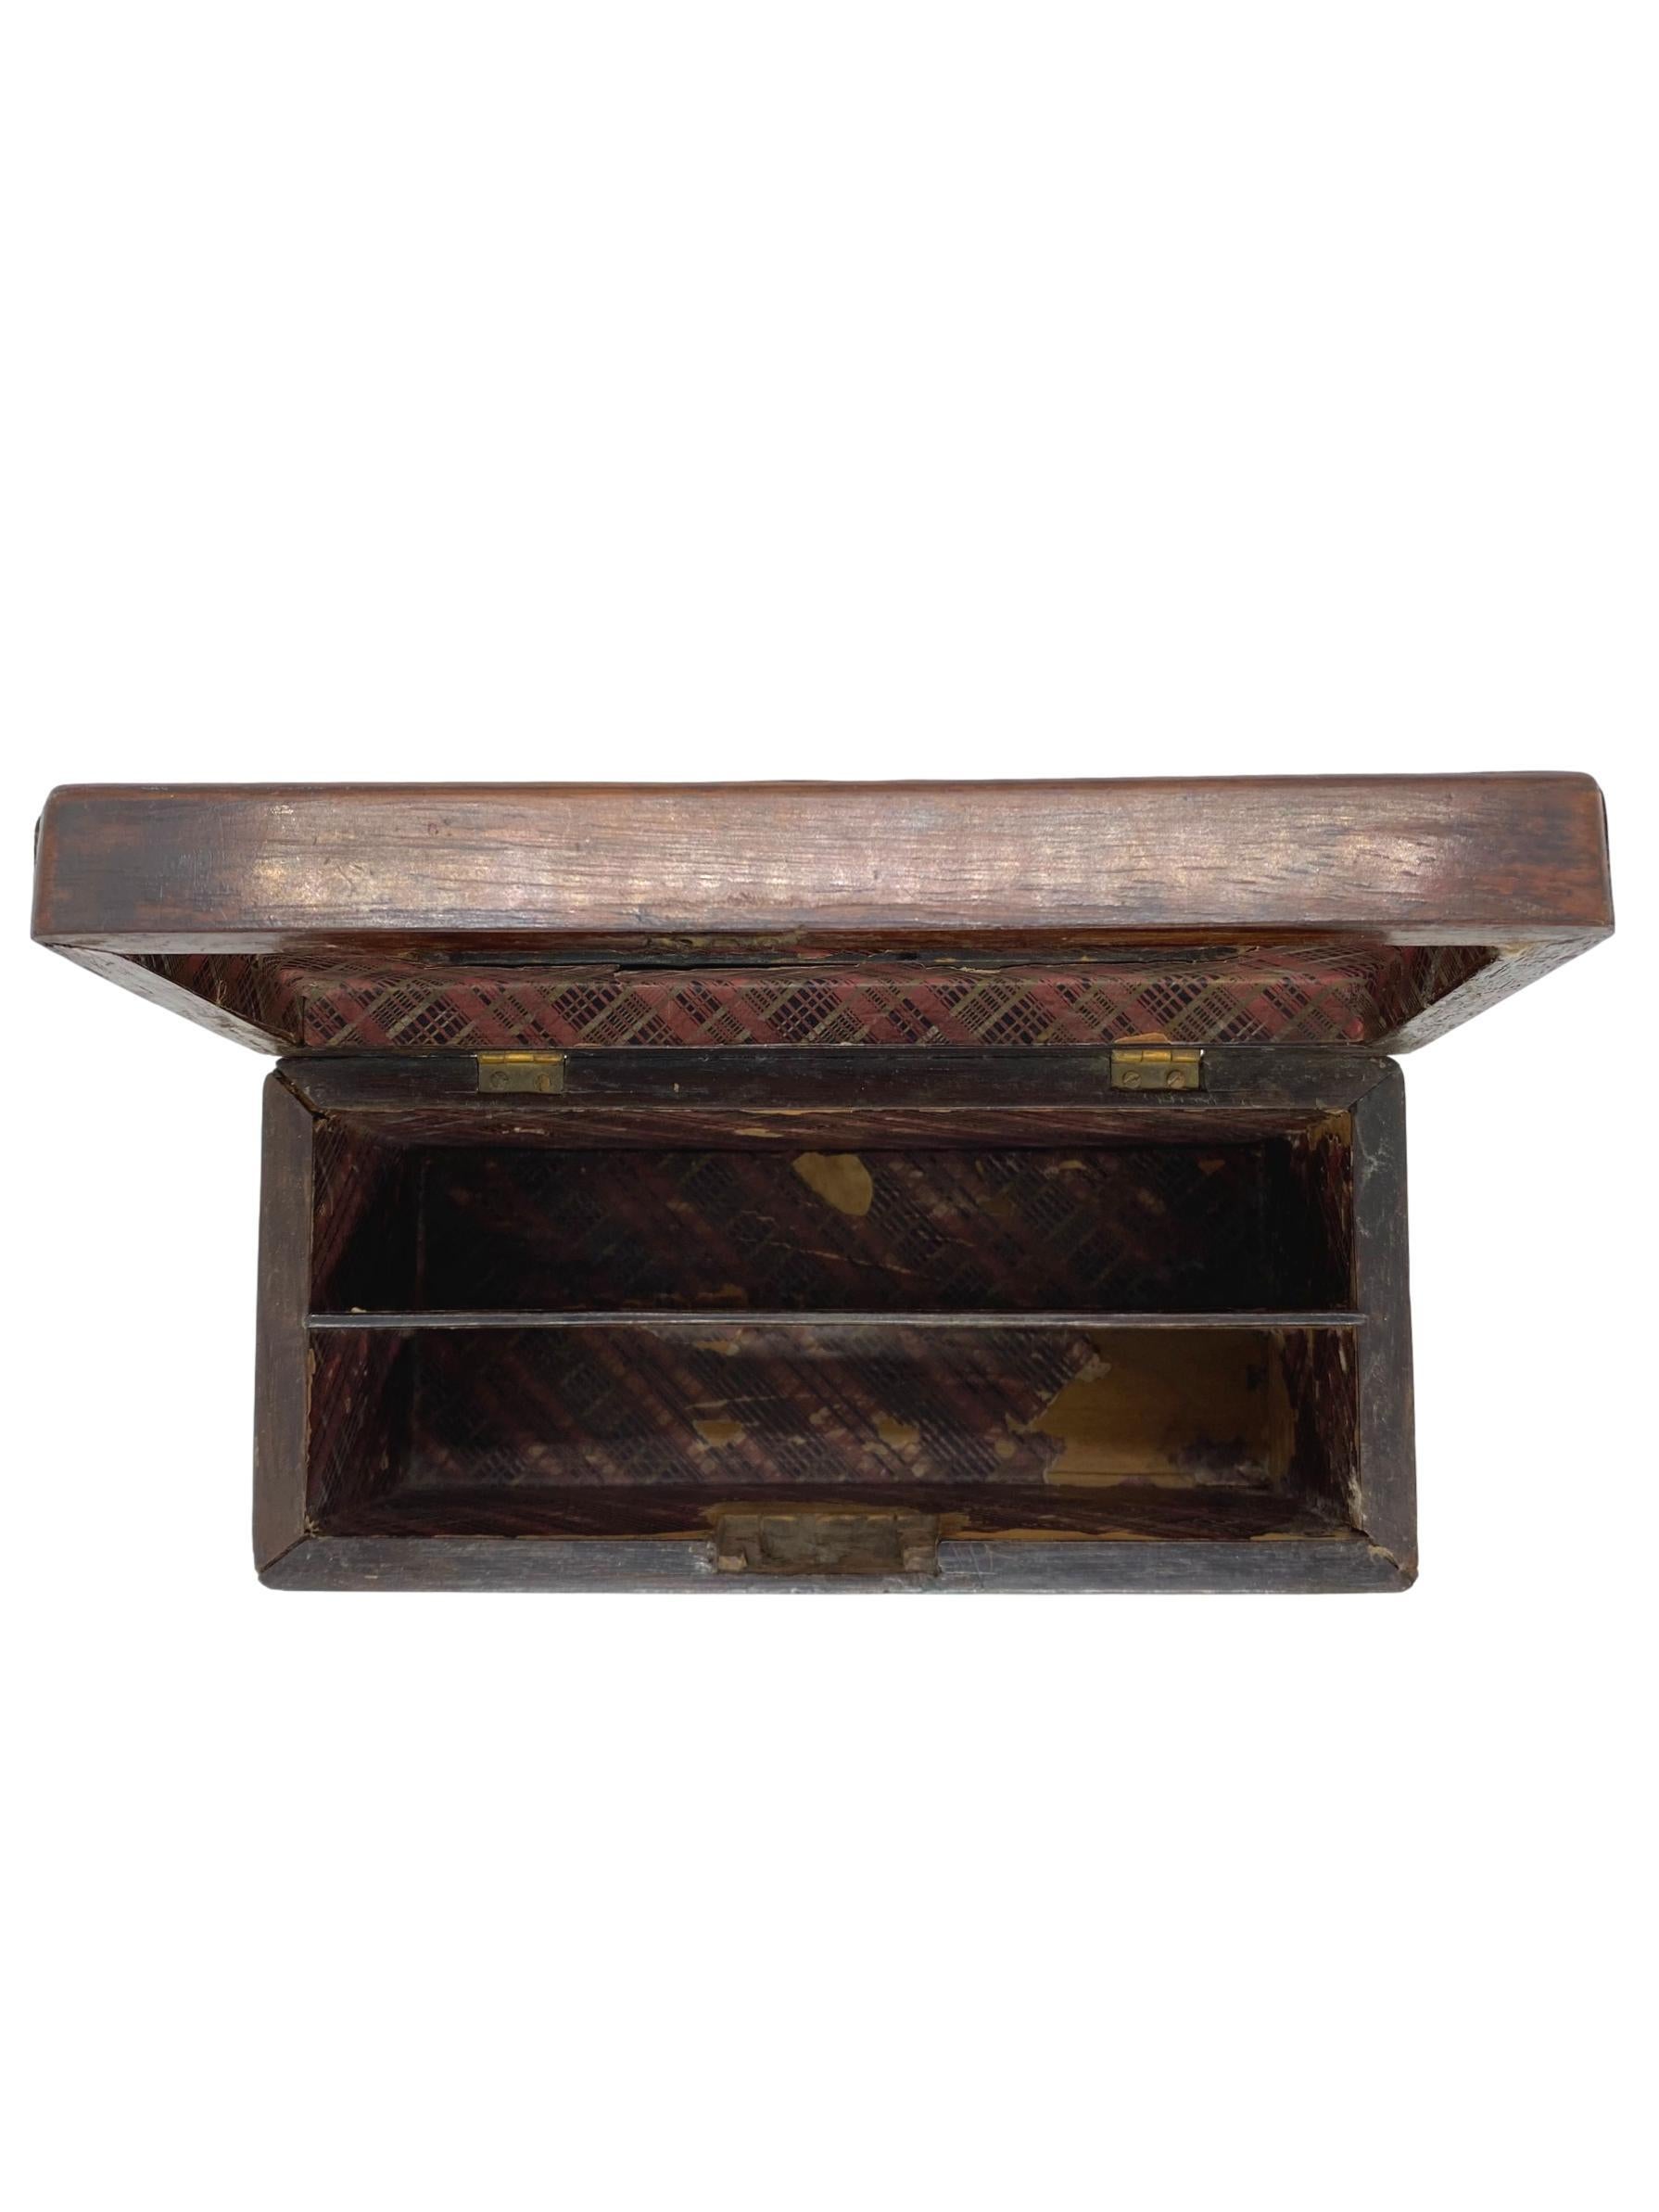 Antique Rosewood Letter Box with Mother-of-Pearl Plaques, English, ca. 1860 3